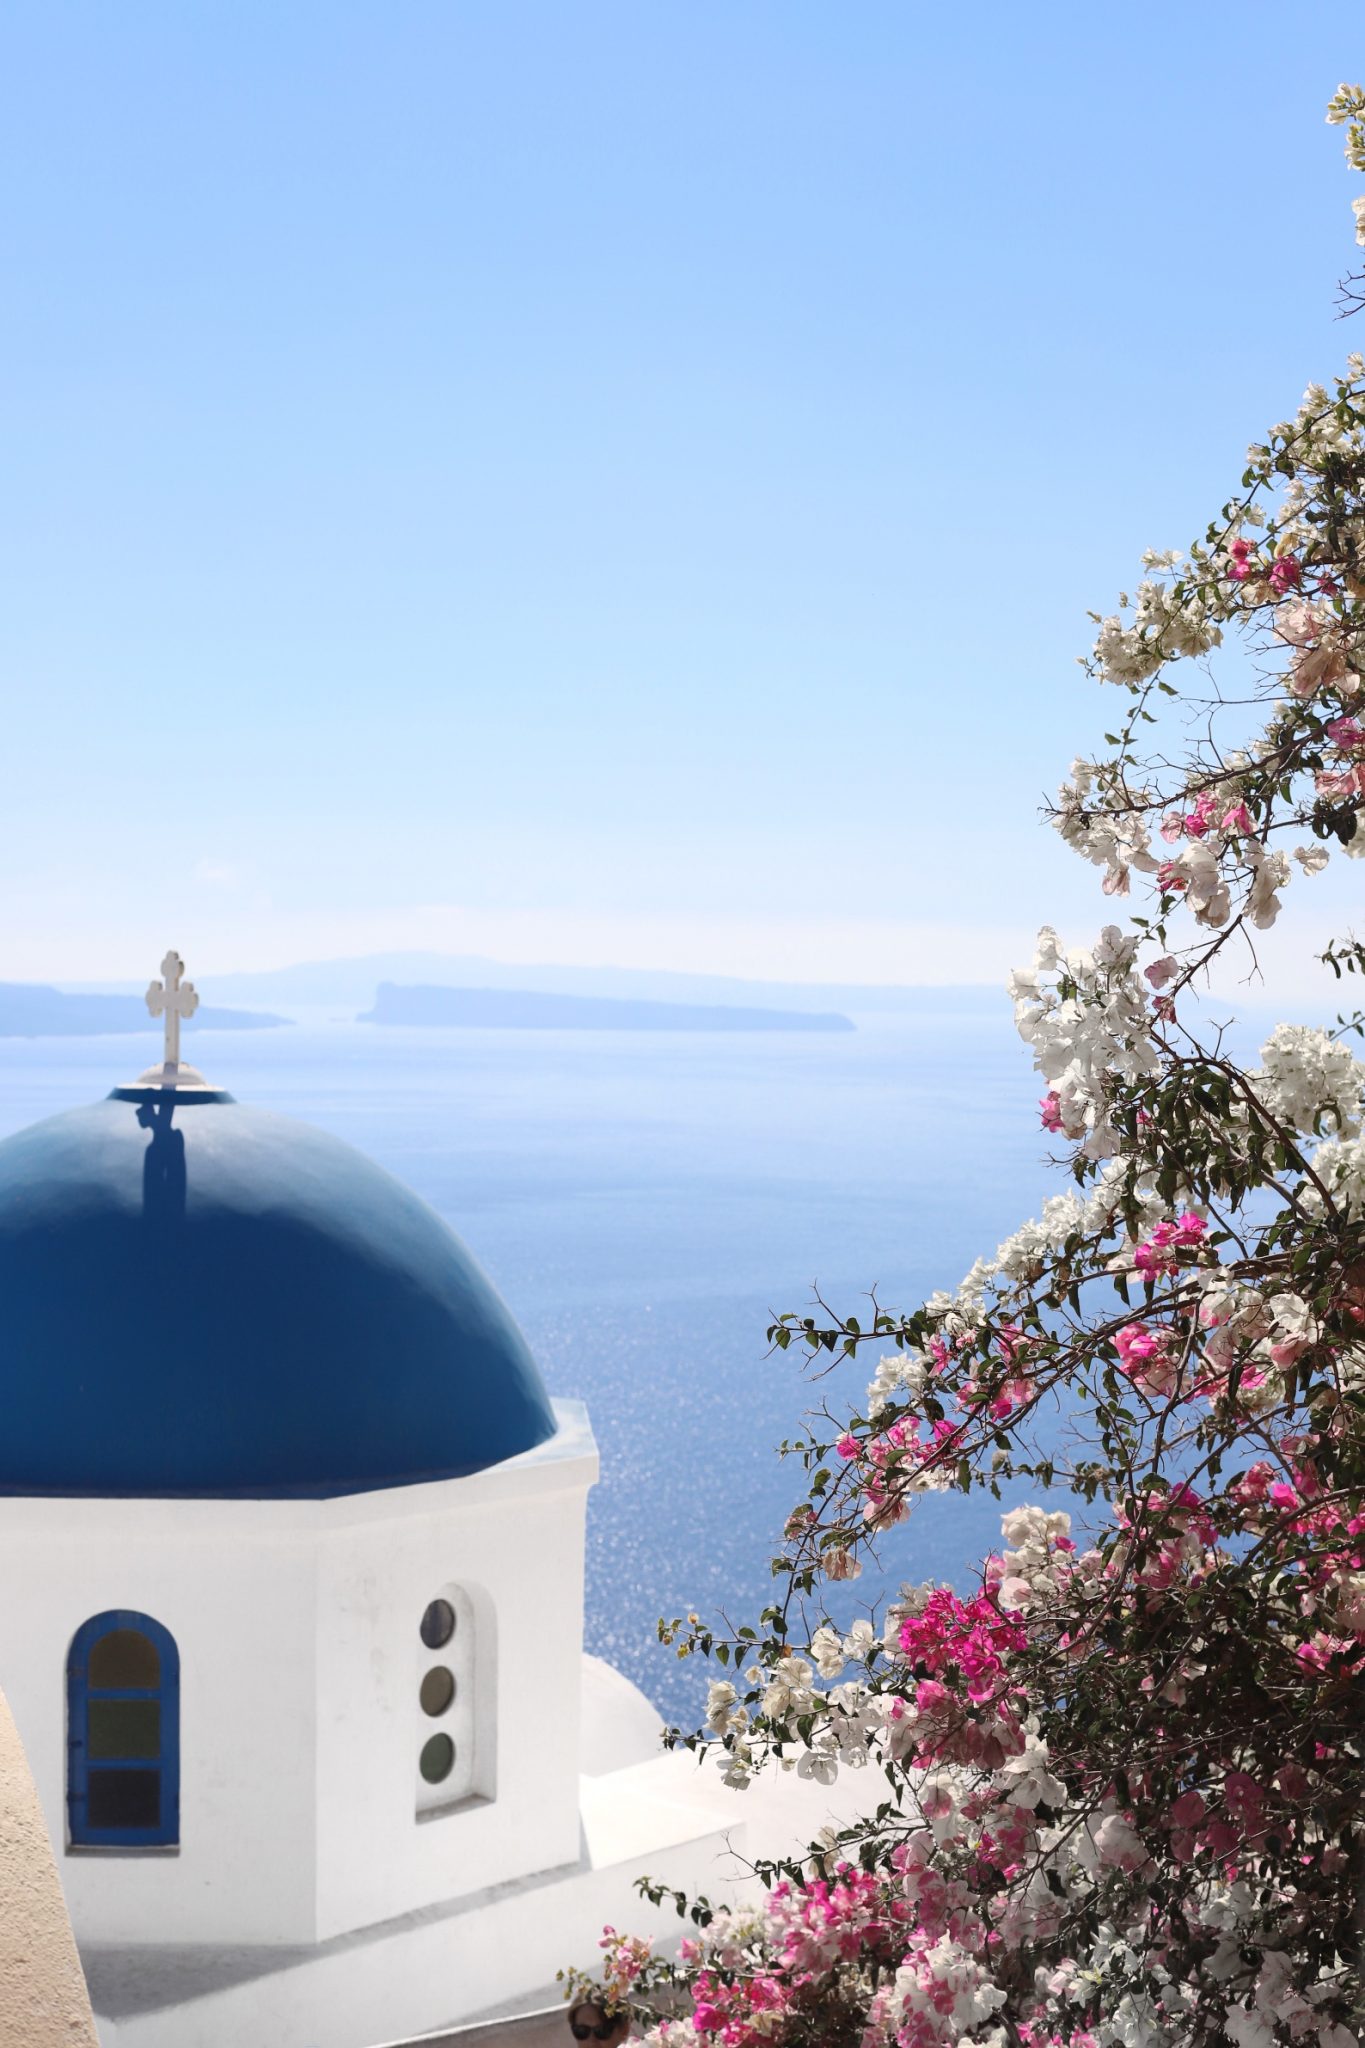 oia santorini, blue domes, where to go in oia, where to go in santorini, greece, south moon under ABBELINE EMBROIDERED SCOOP BACK COLD SHOULDER TOP, what to wear in santorini, white and blue outfit, summer outfit ideas, greece outfit ideas, travel style inspiration